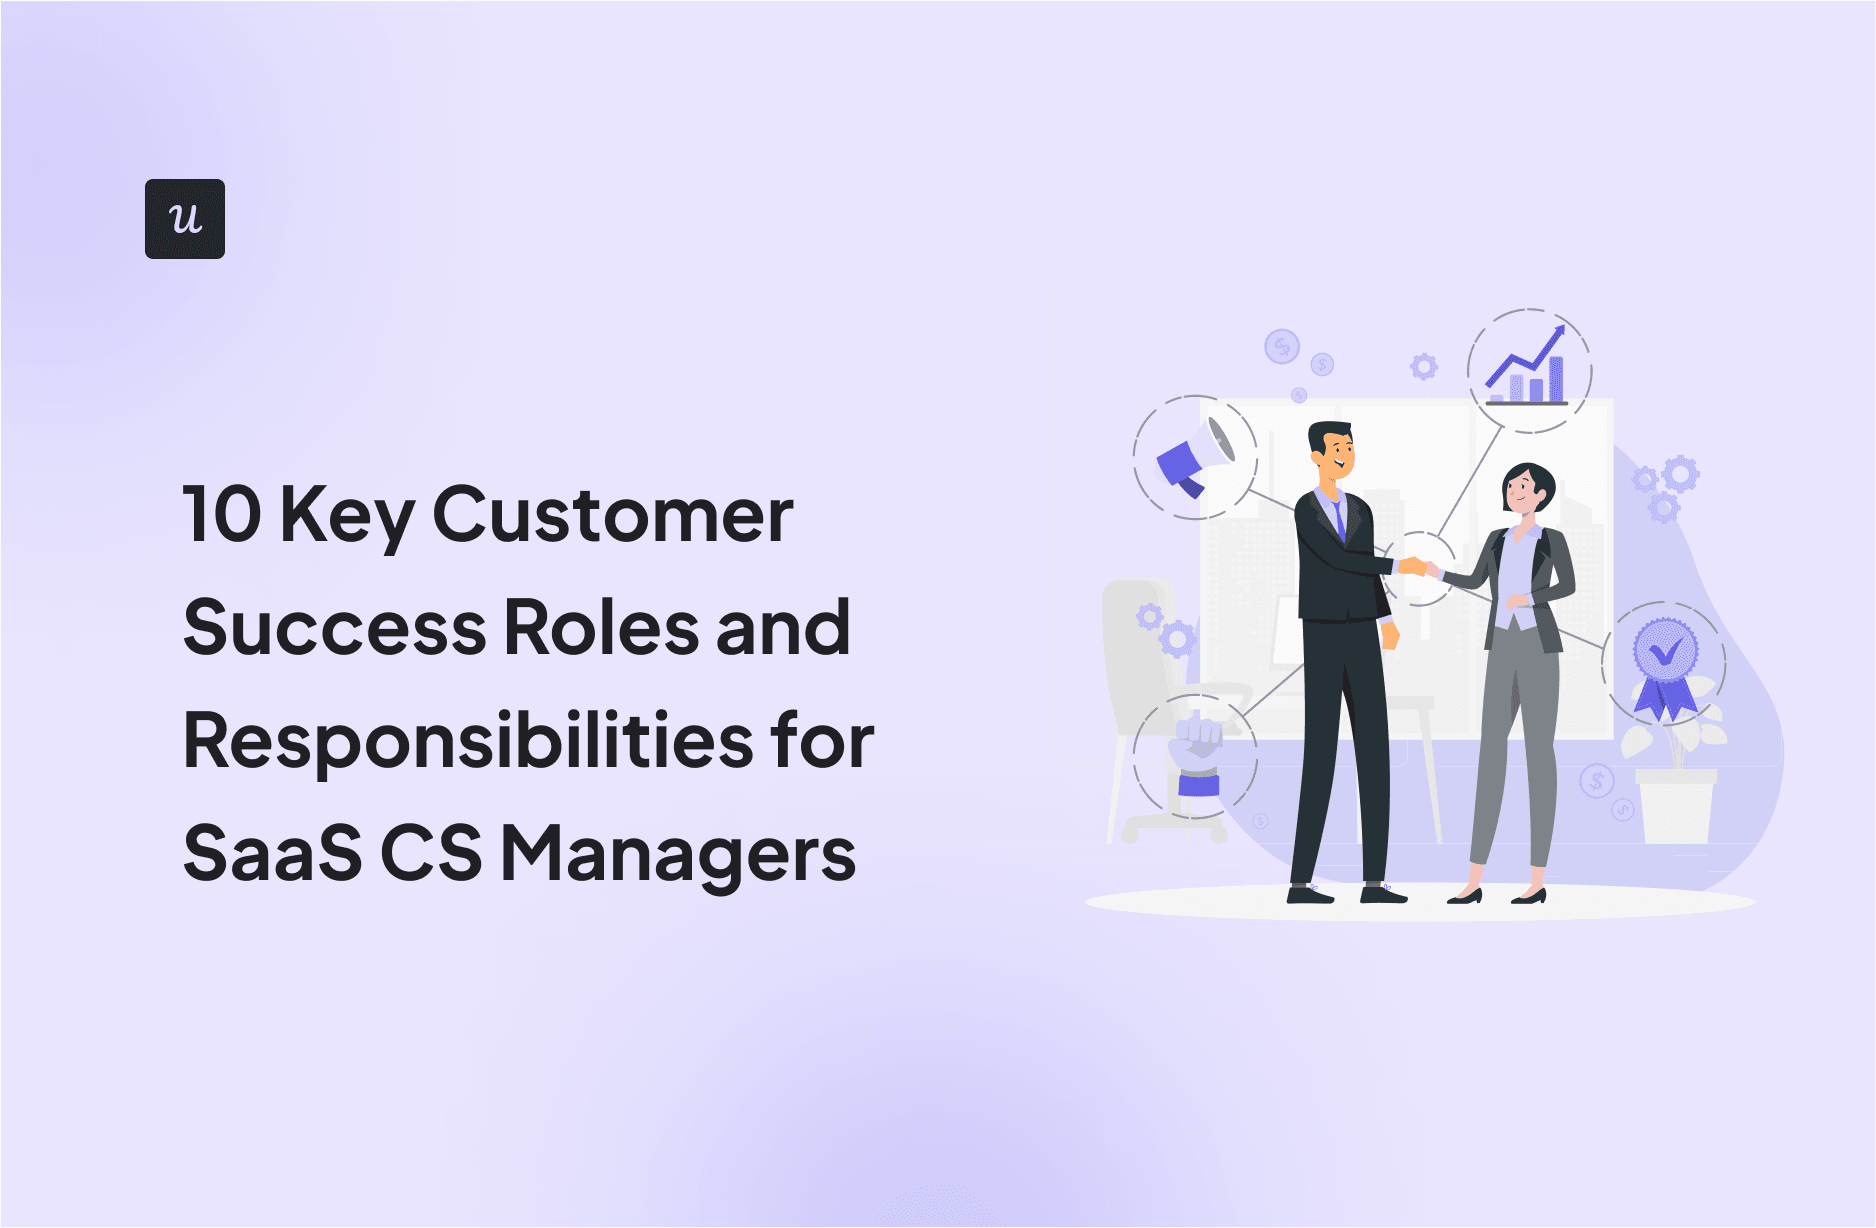 10 Key Customer Success Roles and Responsibilities for SaaS CS Managers cover